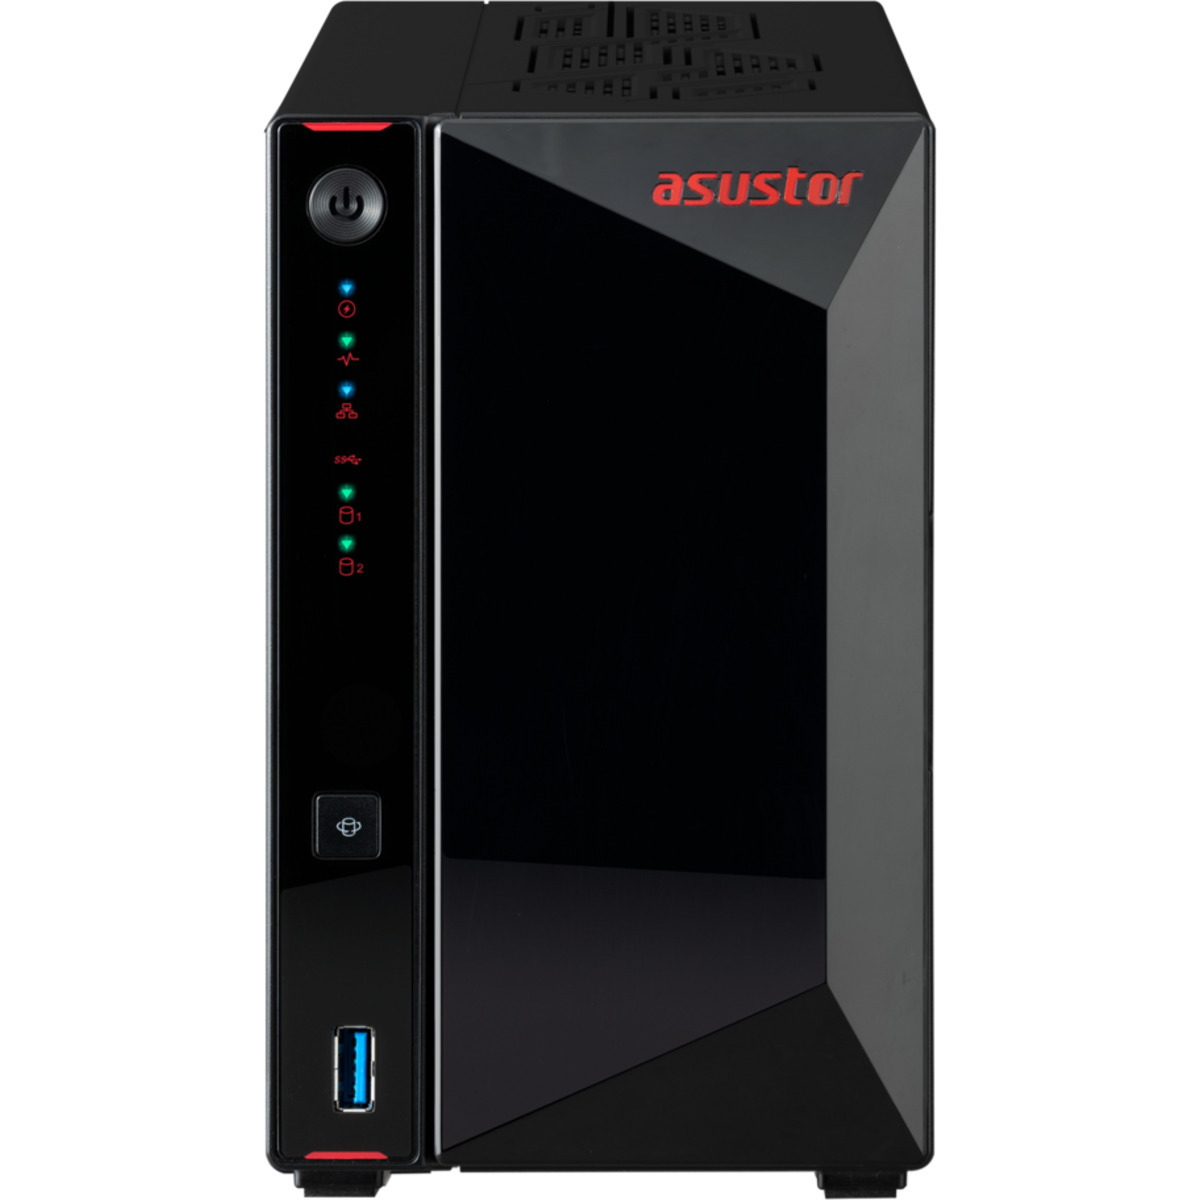 ASUSTOR Nimbustor 2 Gen2 AS5402T 16tb 2-Bay Desktop Multimedia / Power User / Business NAS - Network Attached Storage Device 2x8tb Seagate BarraCuda ST8000DM004 3.5 5400rpm SATA 6Gb/s HDD CONSUMER Class Drives Installed - Burn-In Tested - FREE RAM UPGRADE Nimbustor 2 Gen2 AS5402T